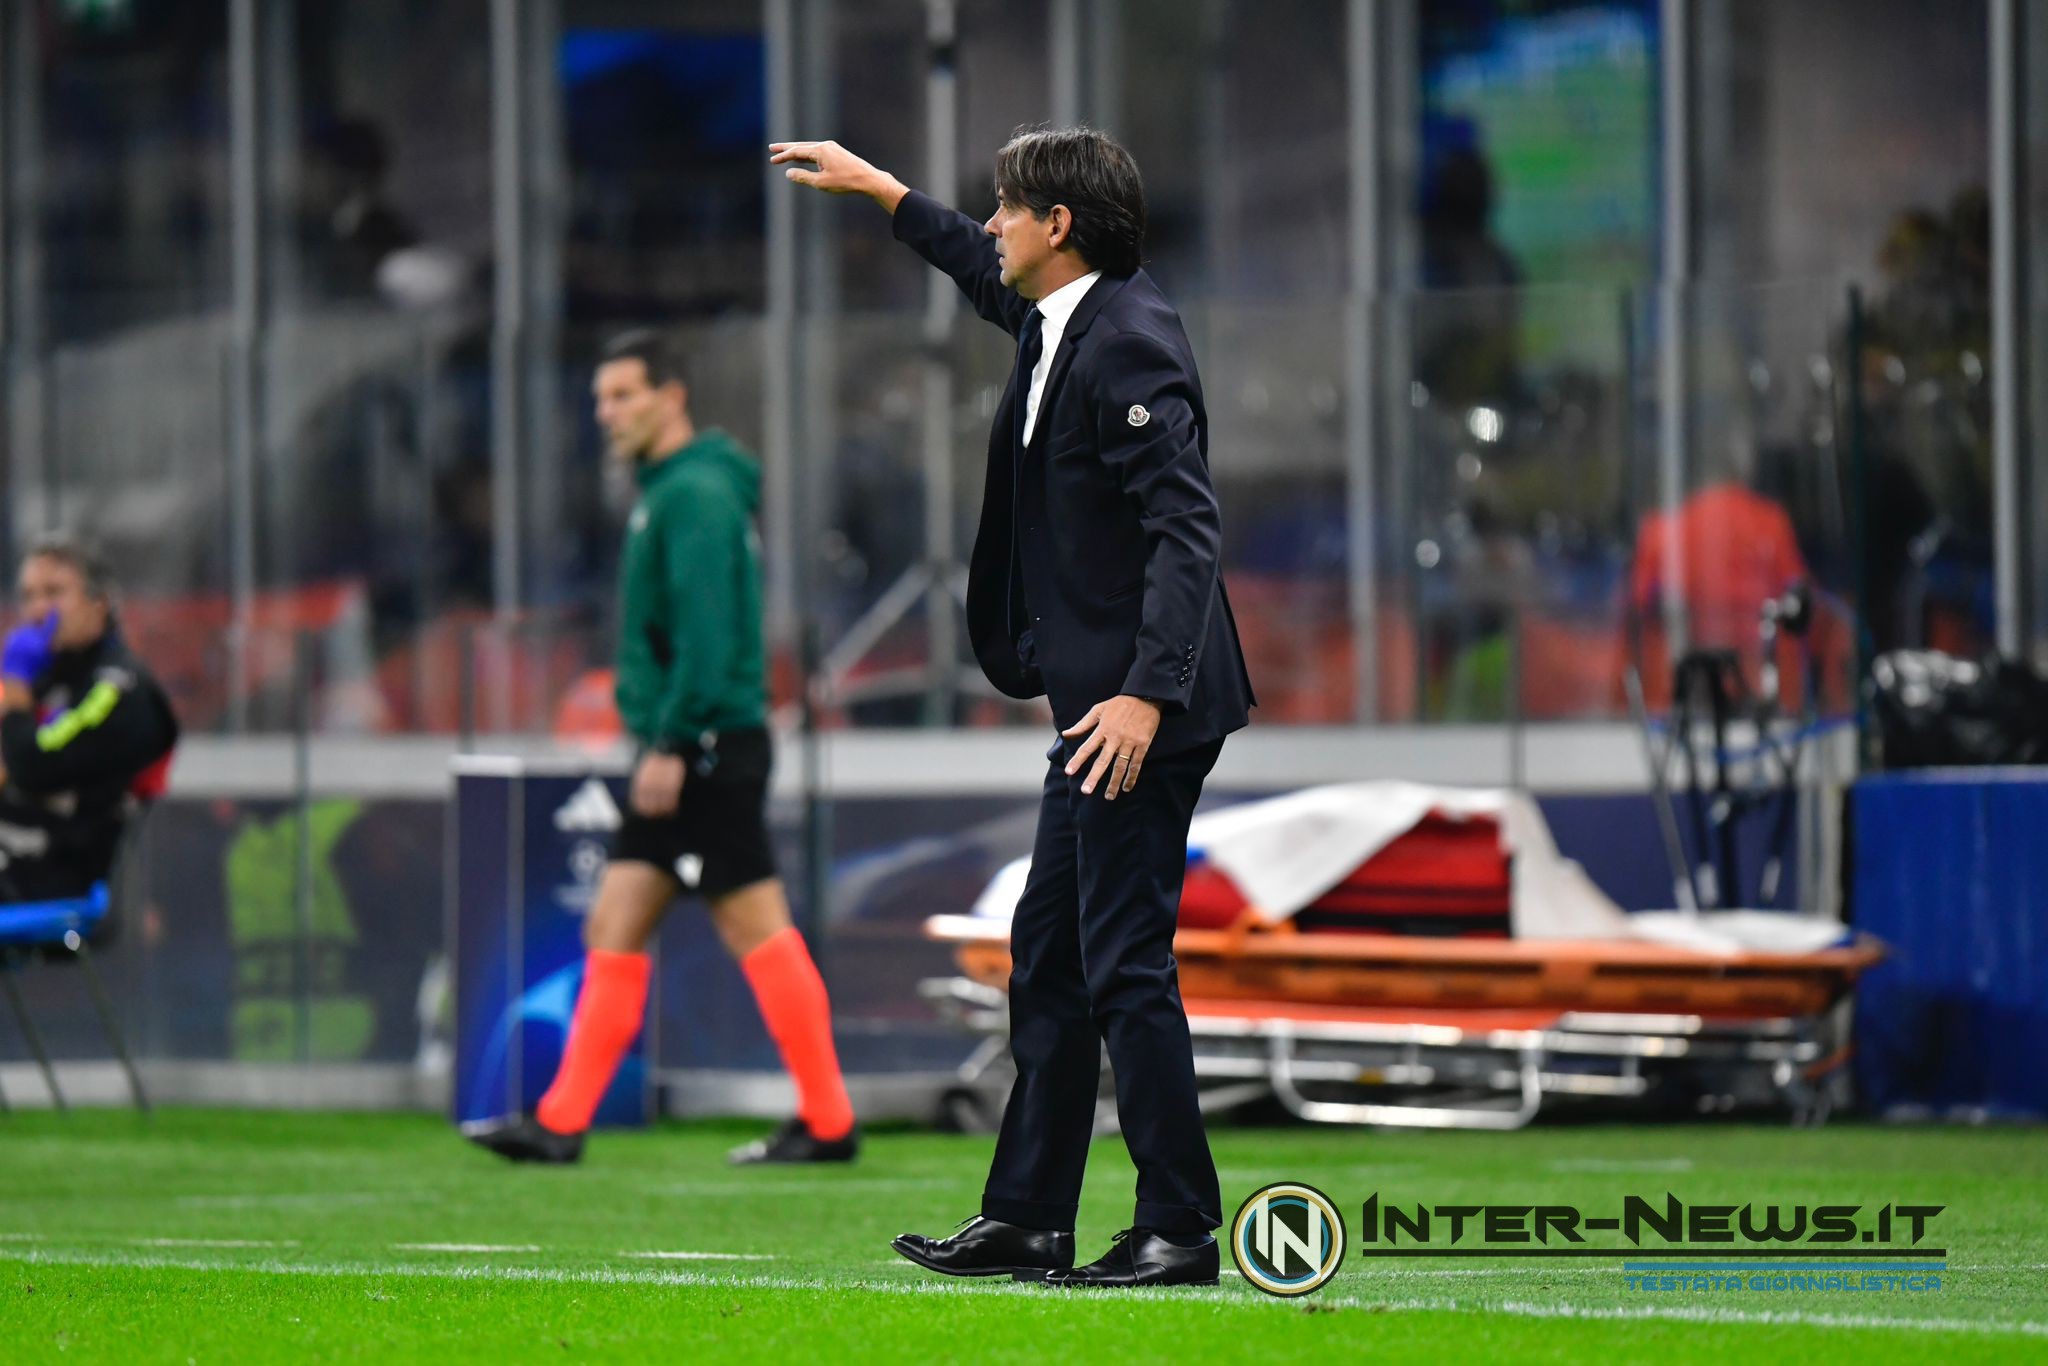 Simone Inzaghi in Inter-Salisburgo (Photo by Tommaso Fimiano/Inter-News.it ©)